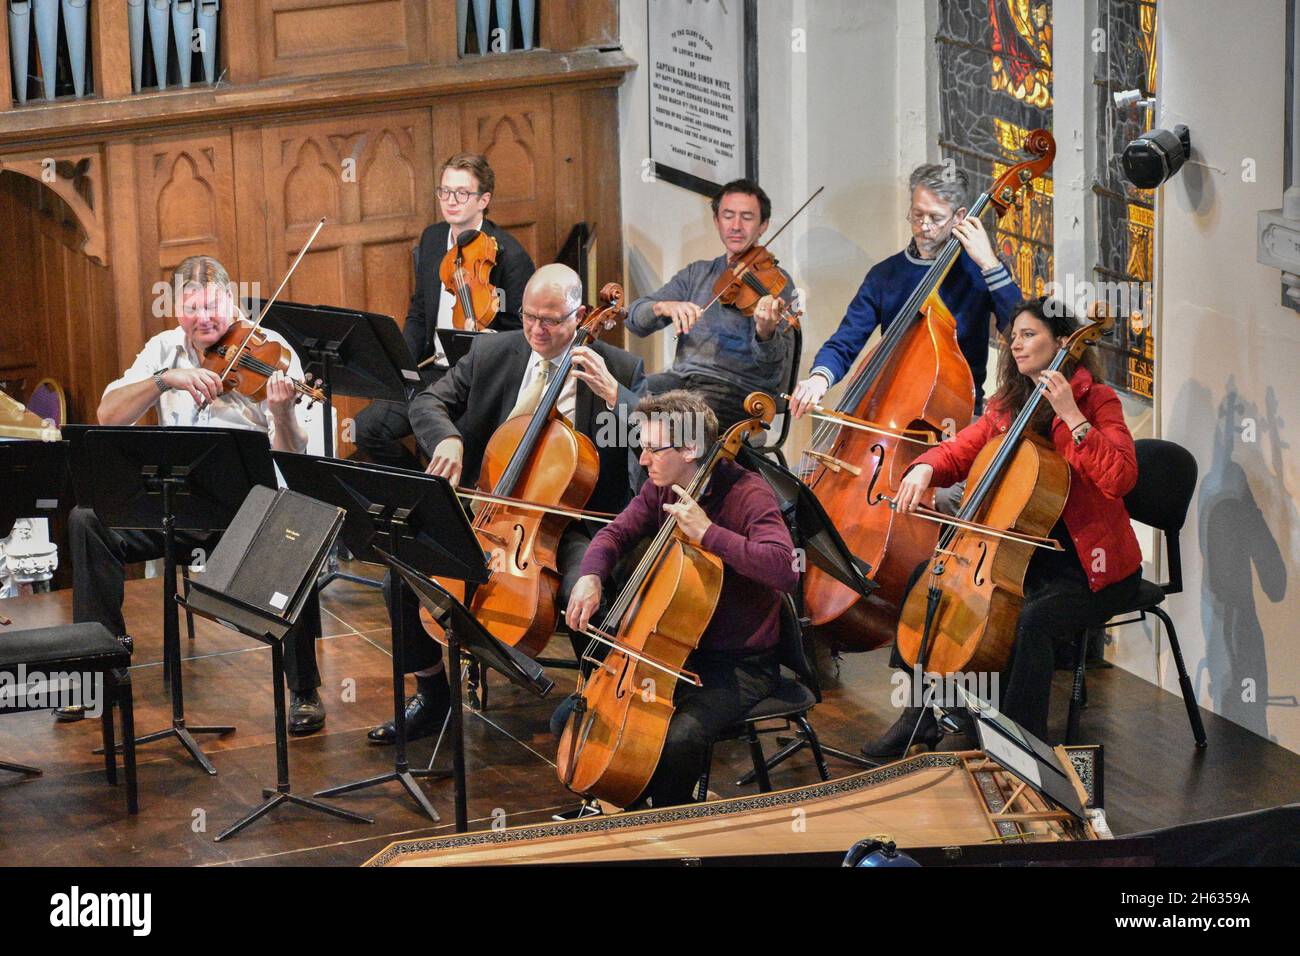 Bantry, West Cork, Ireland. 12th Nov, 2021. The Irish Chamber Orchestra and Florian Donderer of the Signum Quartett performed a beautiful program of music by Bach, Mozart, Debussy, and Leclair in Bantry's St. Brendan's church. Credit: Bantry Media/Alamy Live News Stock Photo